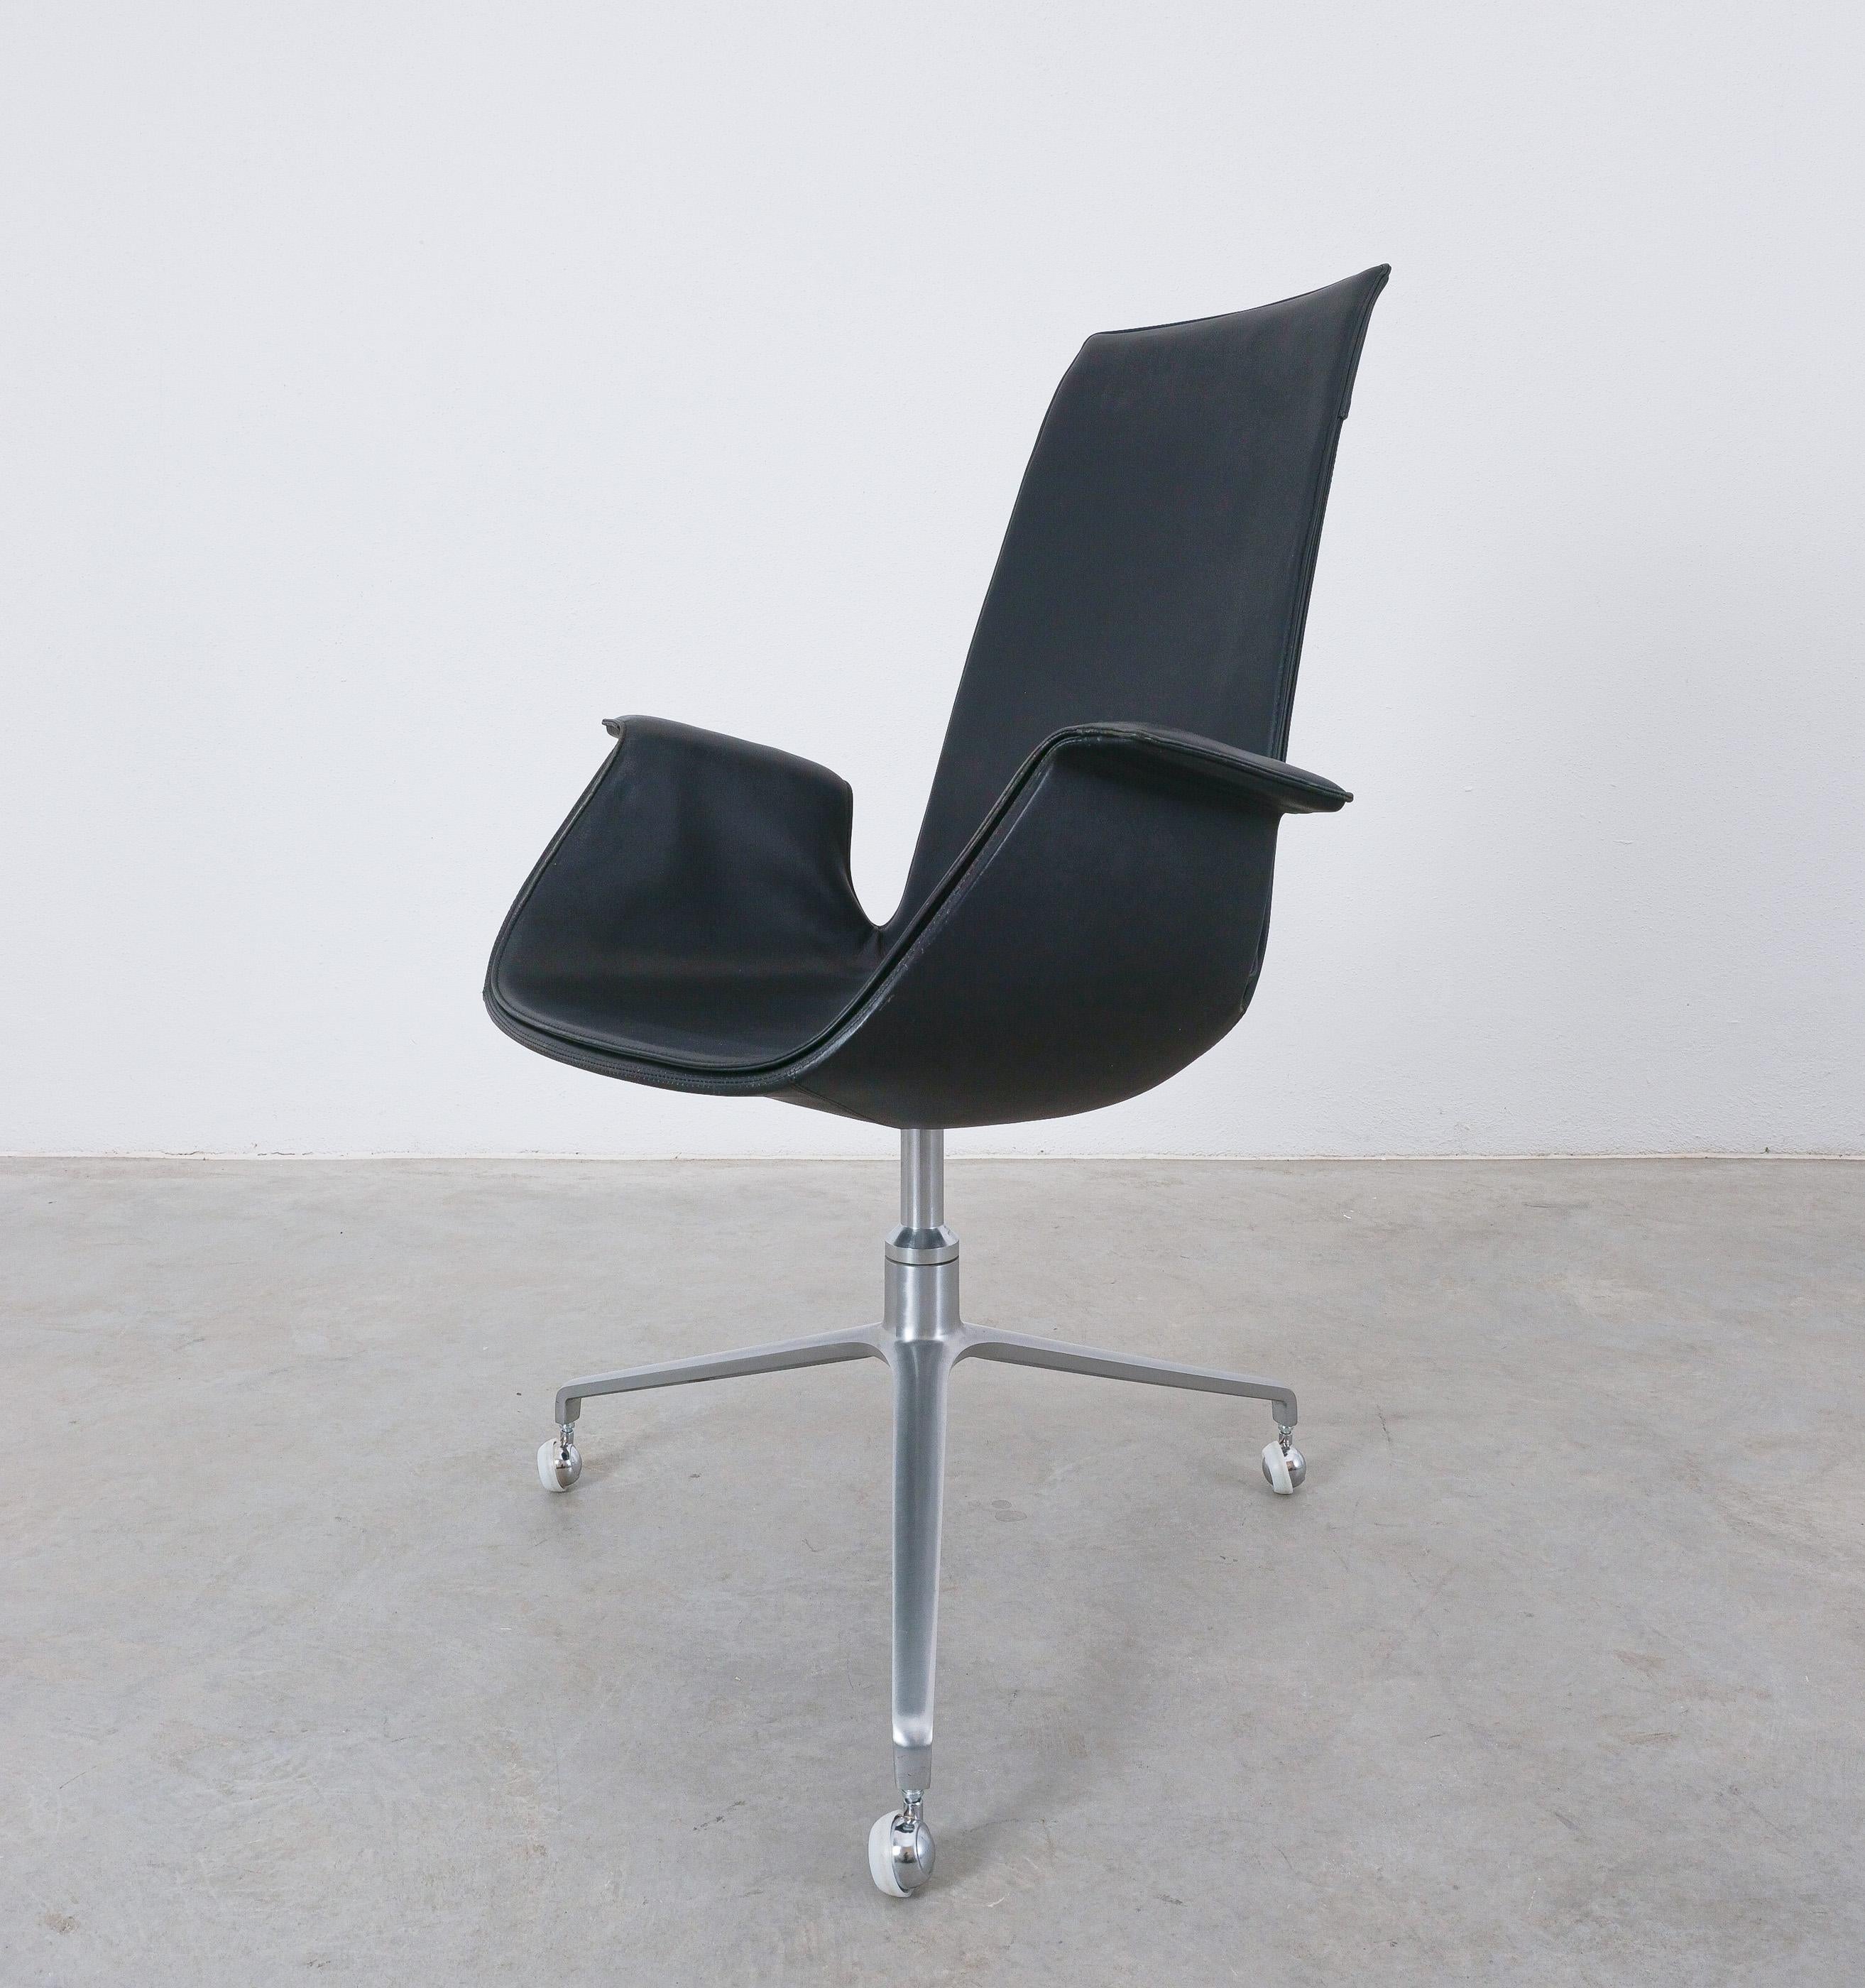 Fabricius and Kastholm Black High Back Bird Desk Chair Swivel Base FK 6725, 1964 In Good Condition For Sale In Vienna, AT